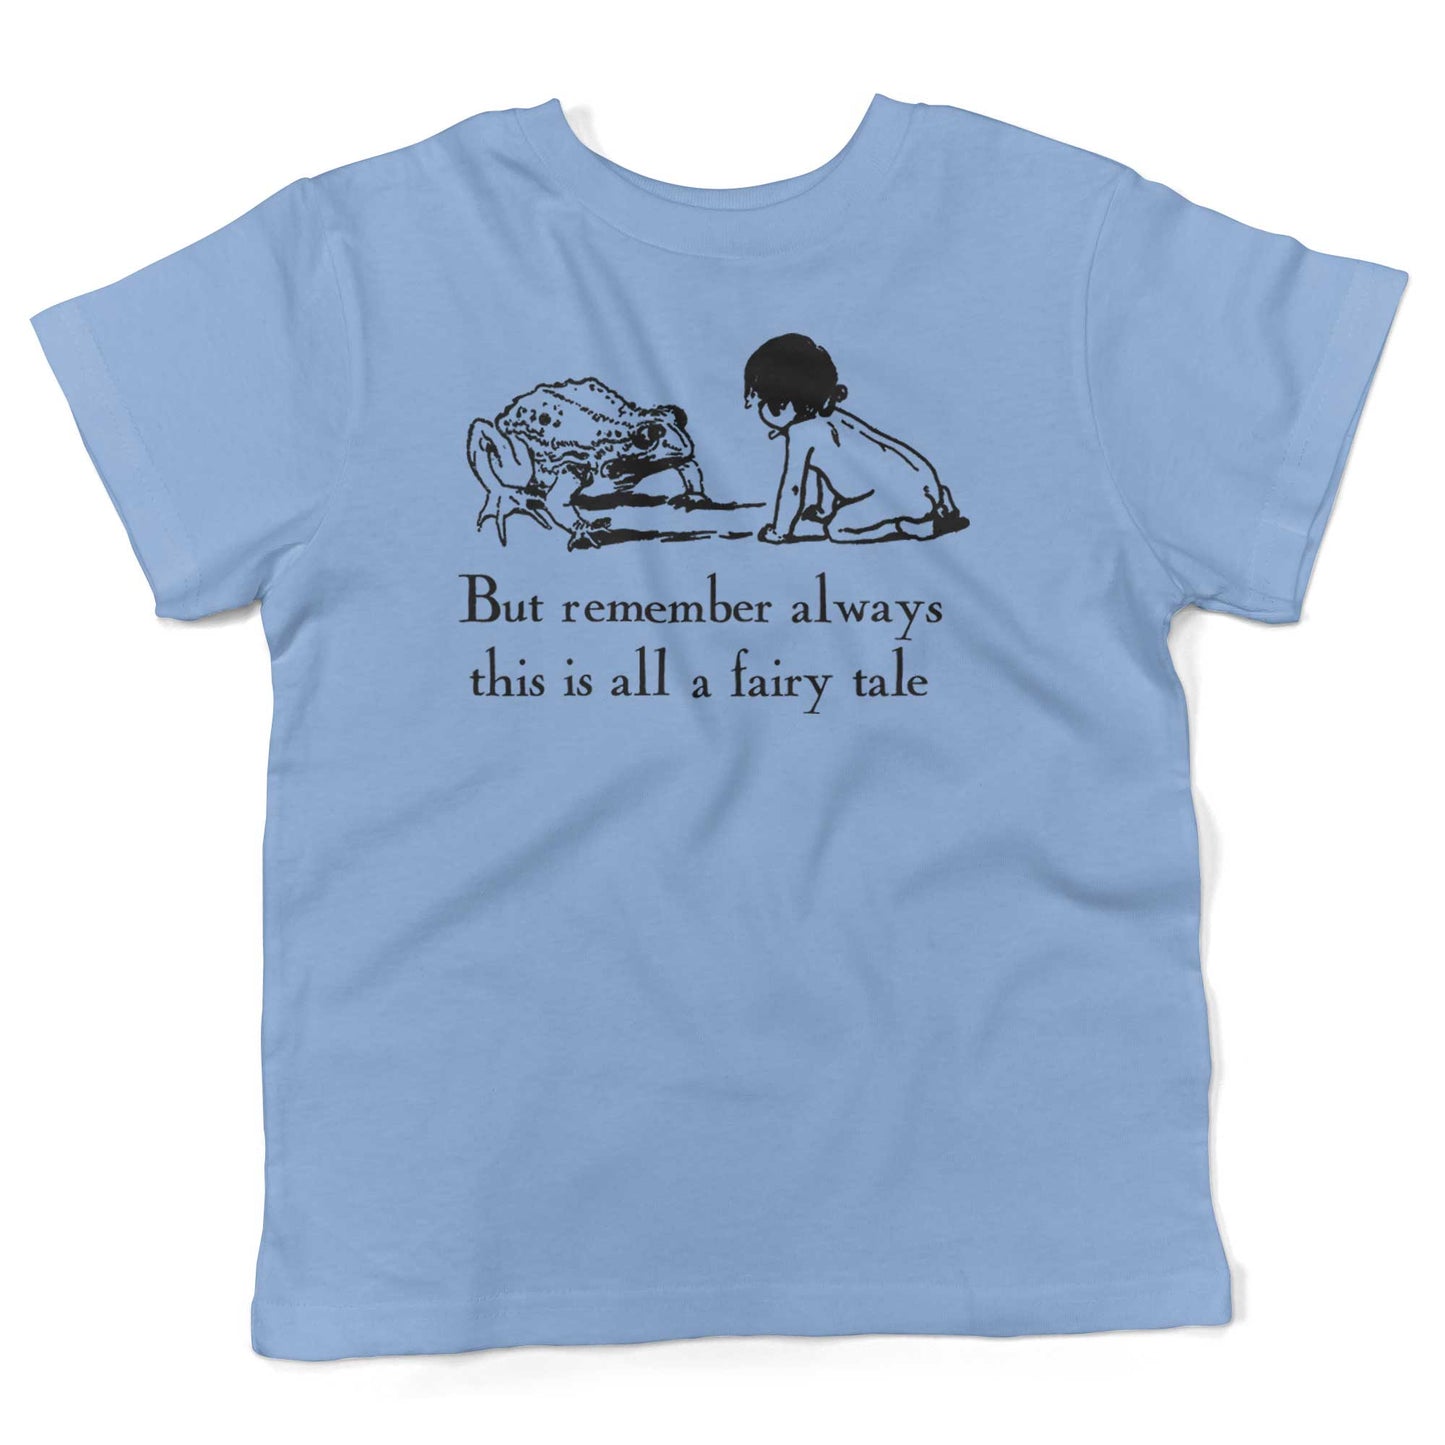 But remember always this is all a fairy tale Toddler Shirt-Organic Baby Blue-2T